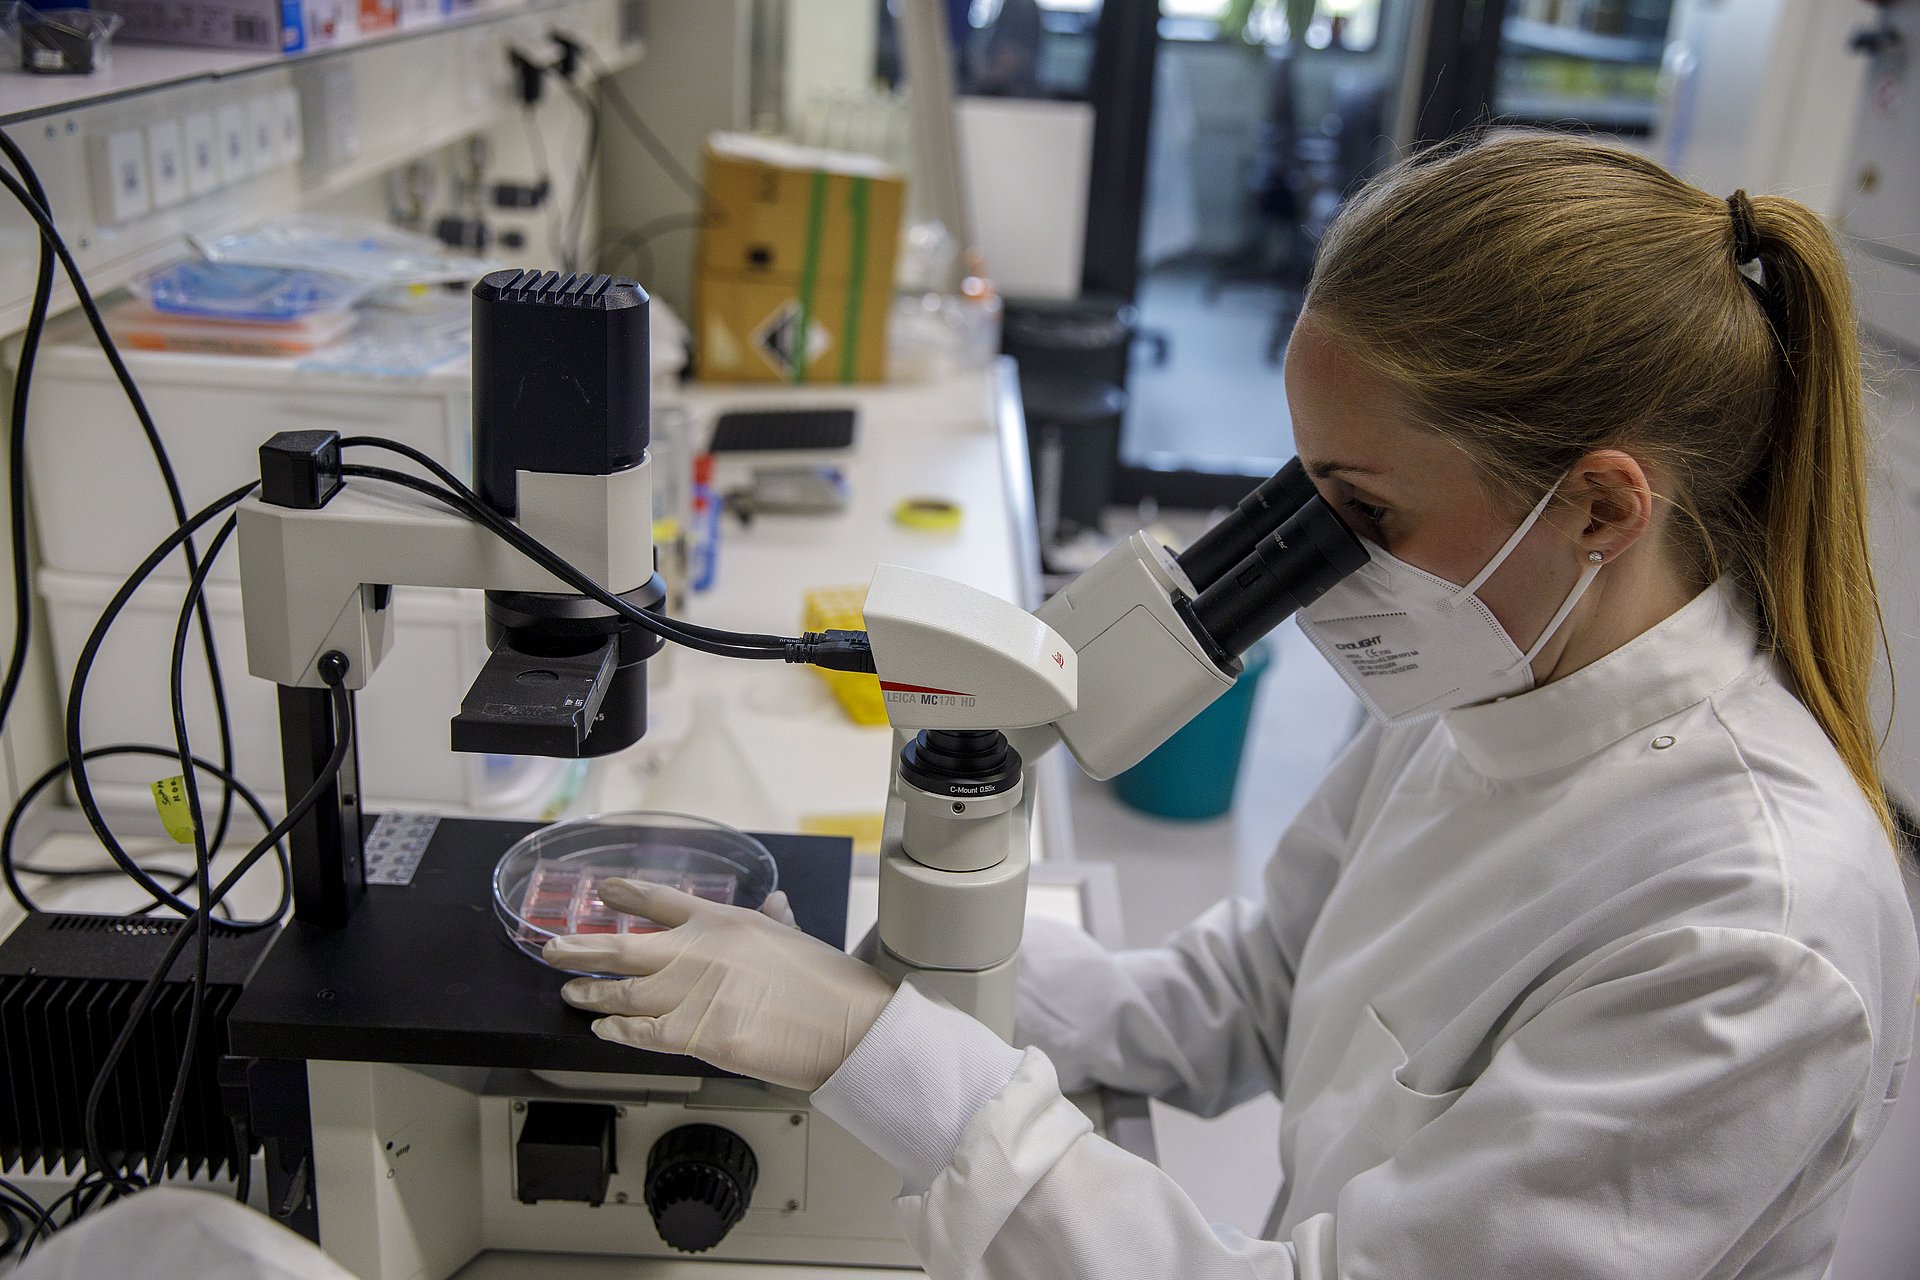 Co-author Marion K. Raich studies cell cultures under the microscope.